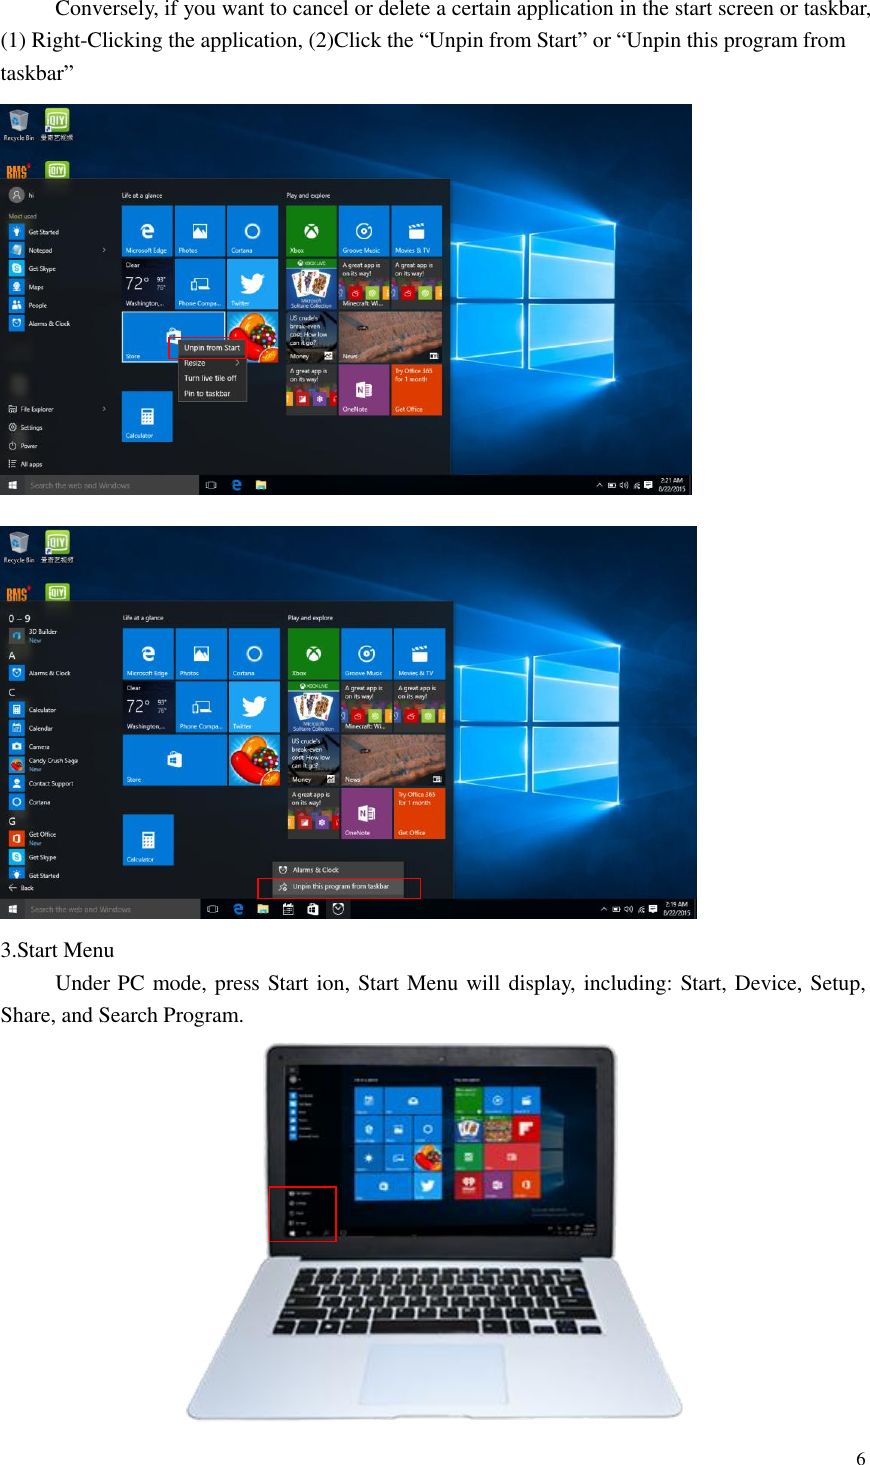  6  Conversely, if you want to cancel or delete a certain application in the start screen or taskbar, (1) Right-Clicking the application, (2)Click the “Unpin from Start” or “Unpin this program from taskbar”     3.Start Menu        Under PC mode, press Start ion, Start Menu will display, including: Start, Device, Setup, Share, and Search Program.    